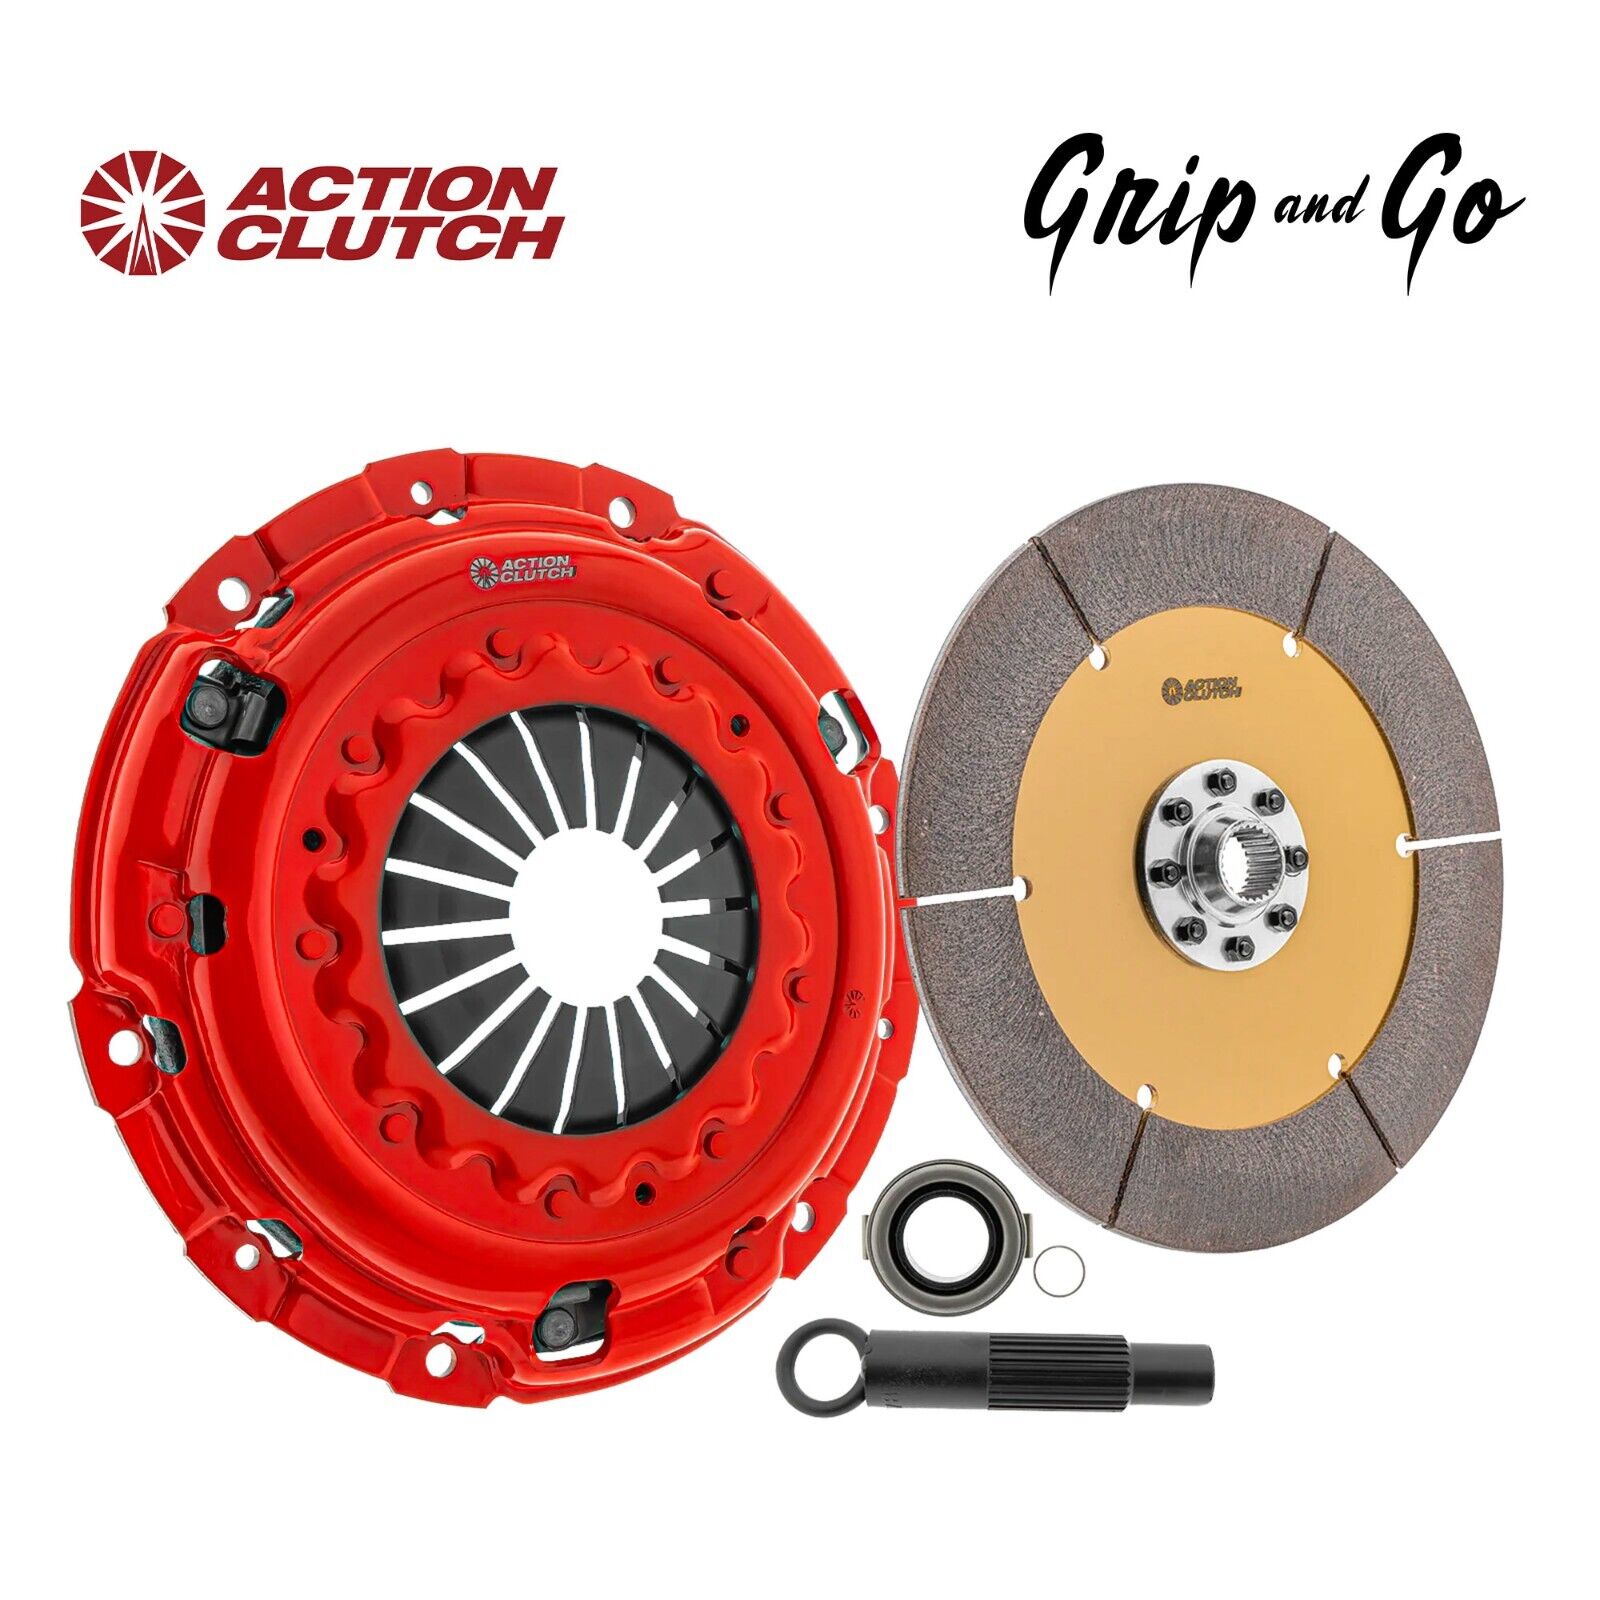 AC Ironman Unsprung Clutch Kit For Toyota Paseo 1992-1999 1.5L DOHC (5EFE)